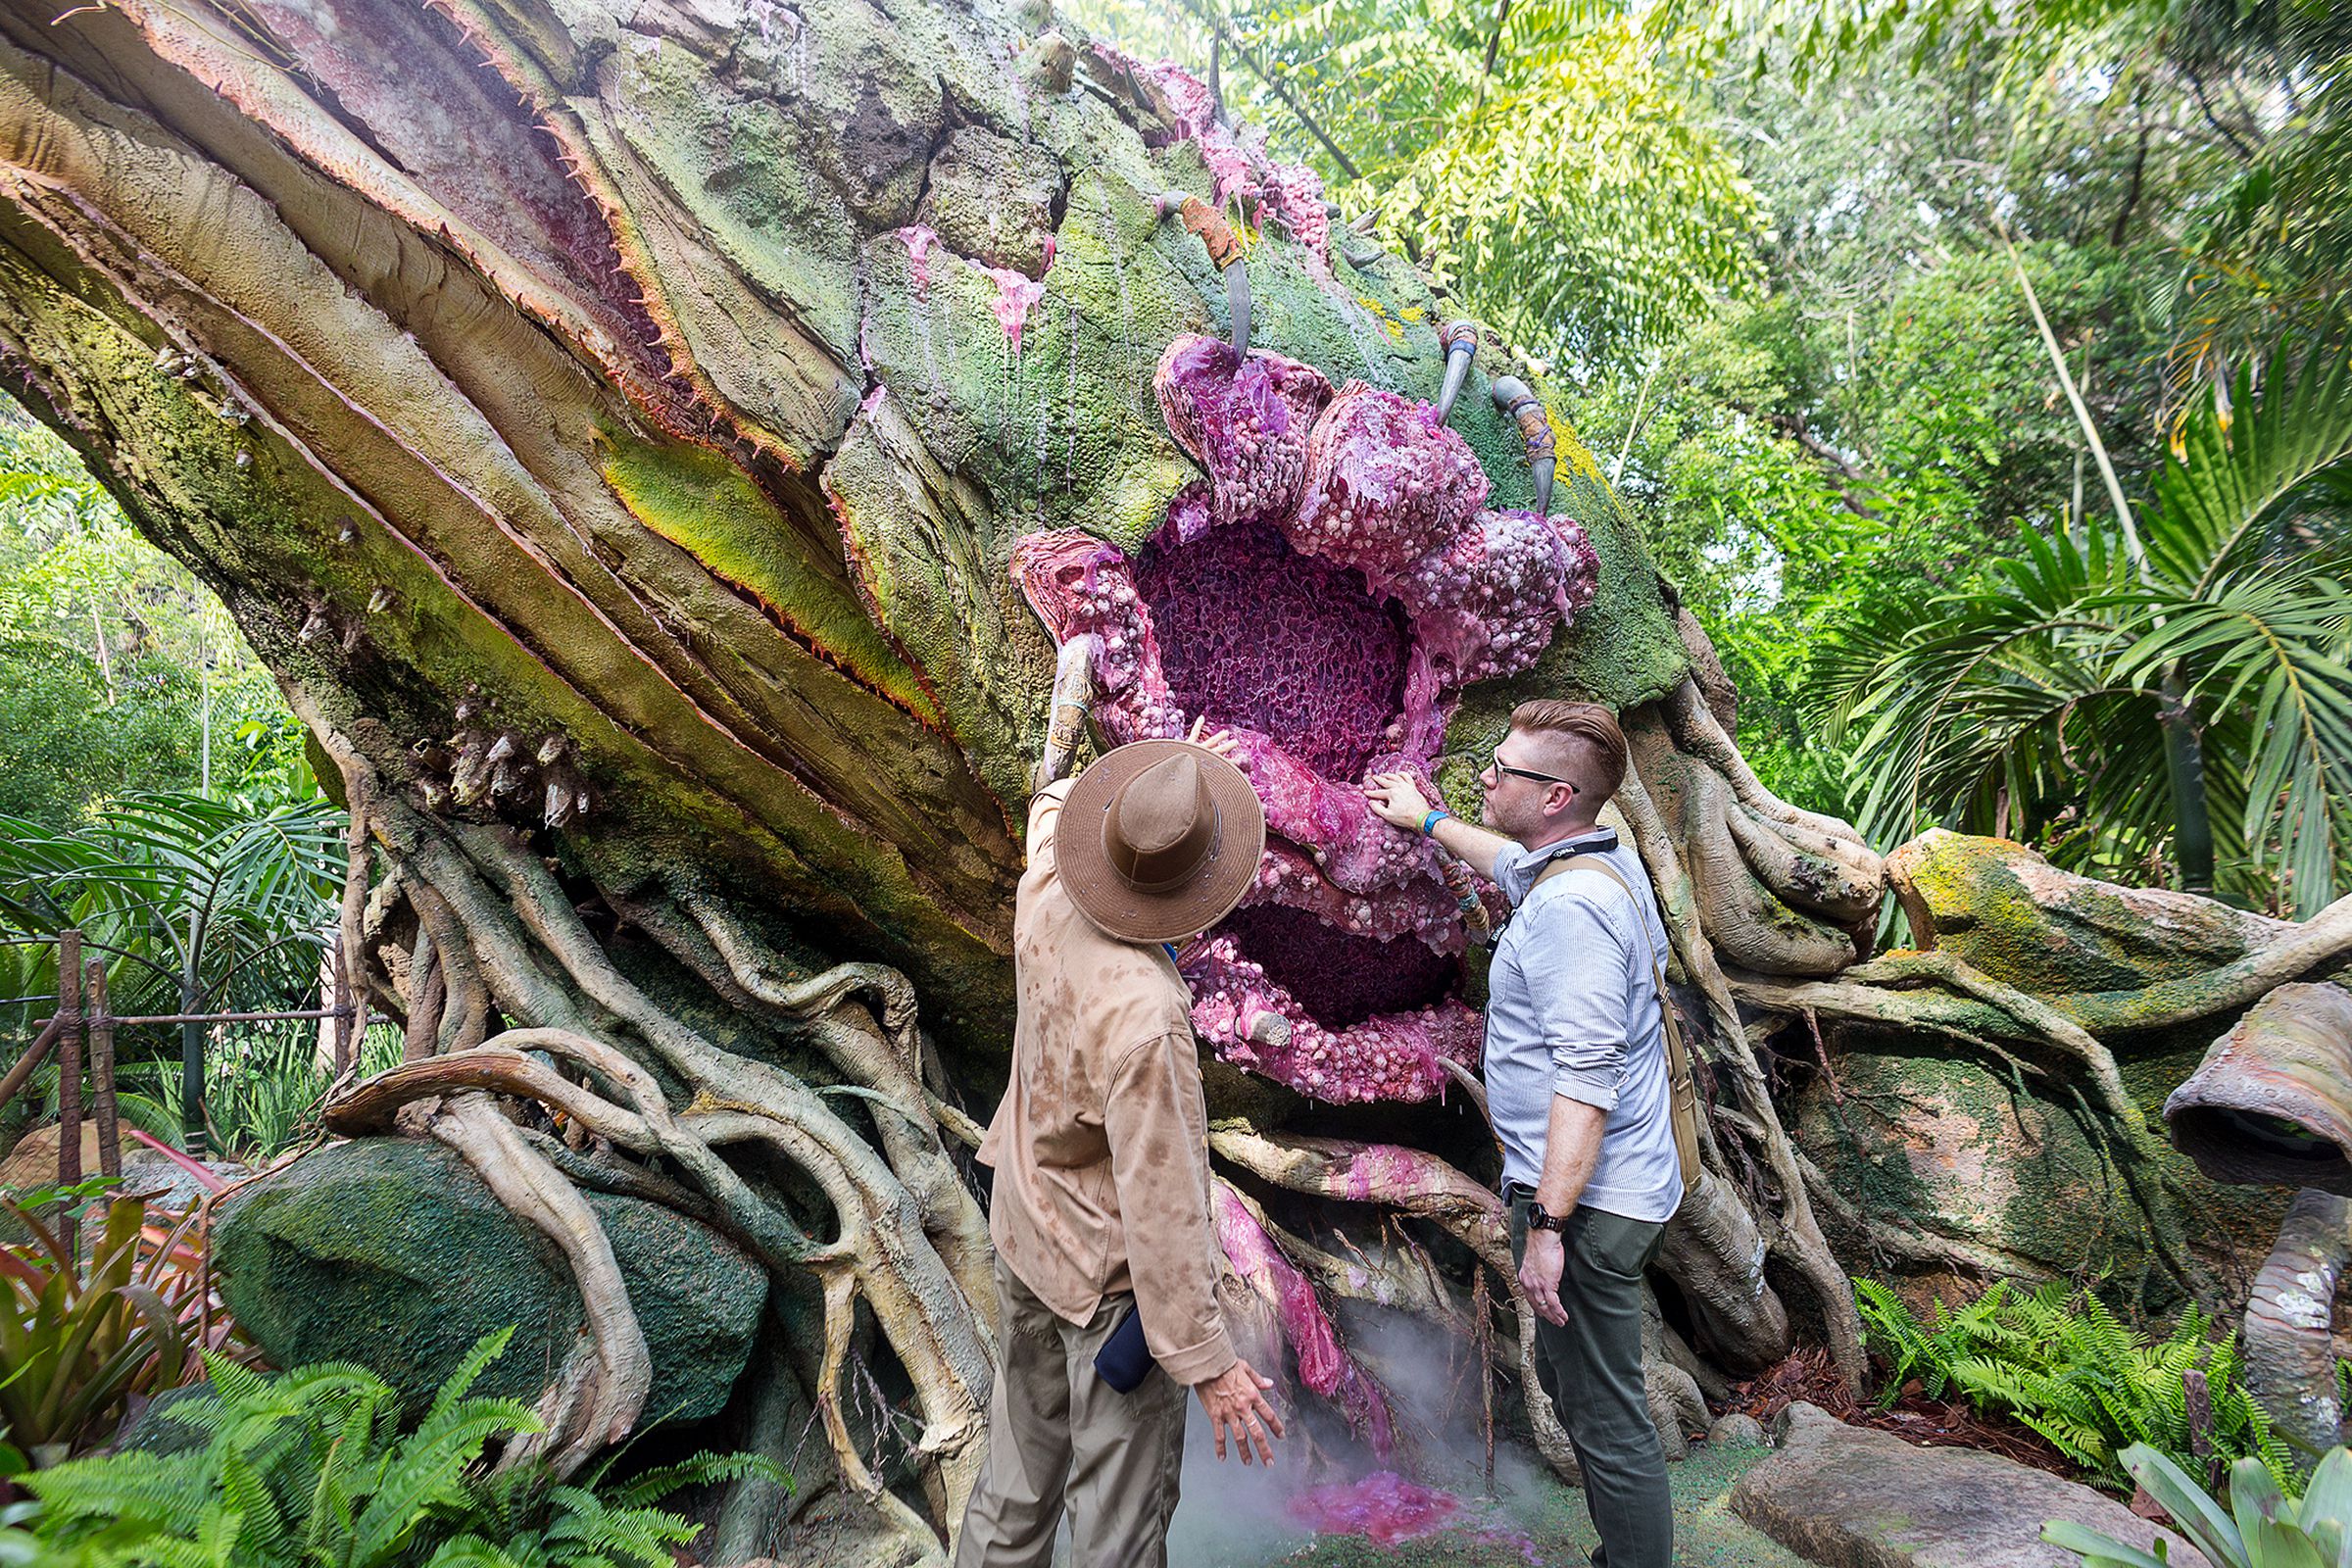 Guides in the employ of Alpha Centauri Expeditions teach visitors about the flora and fauna of Pandora.